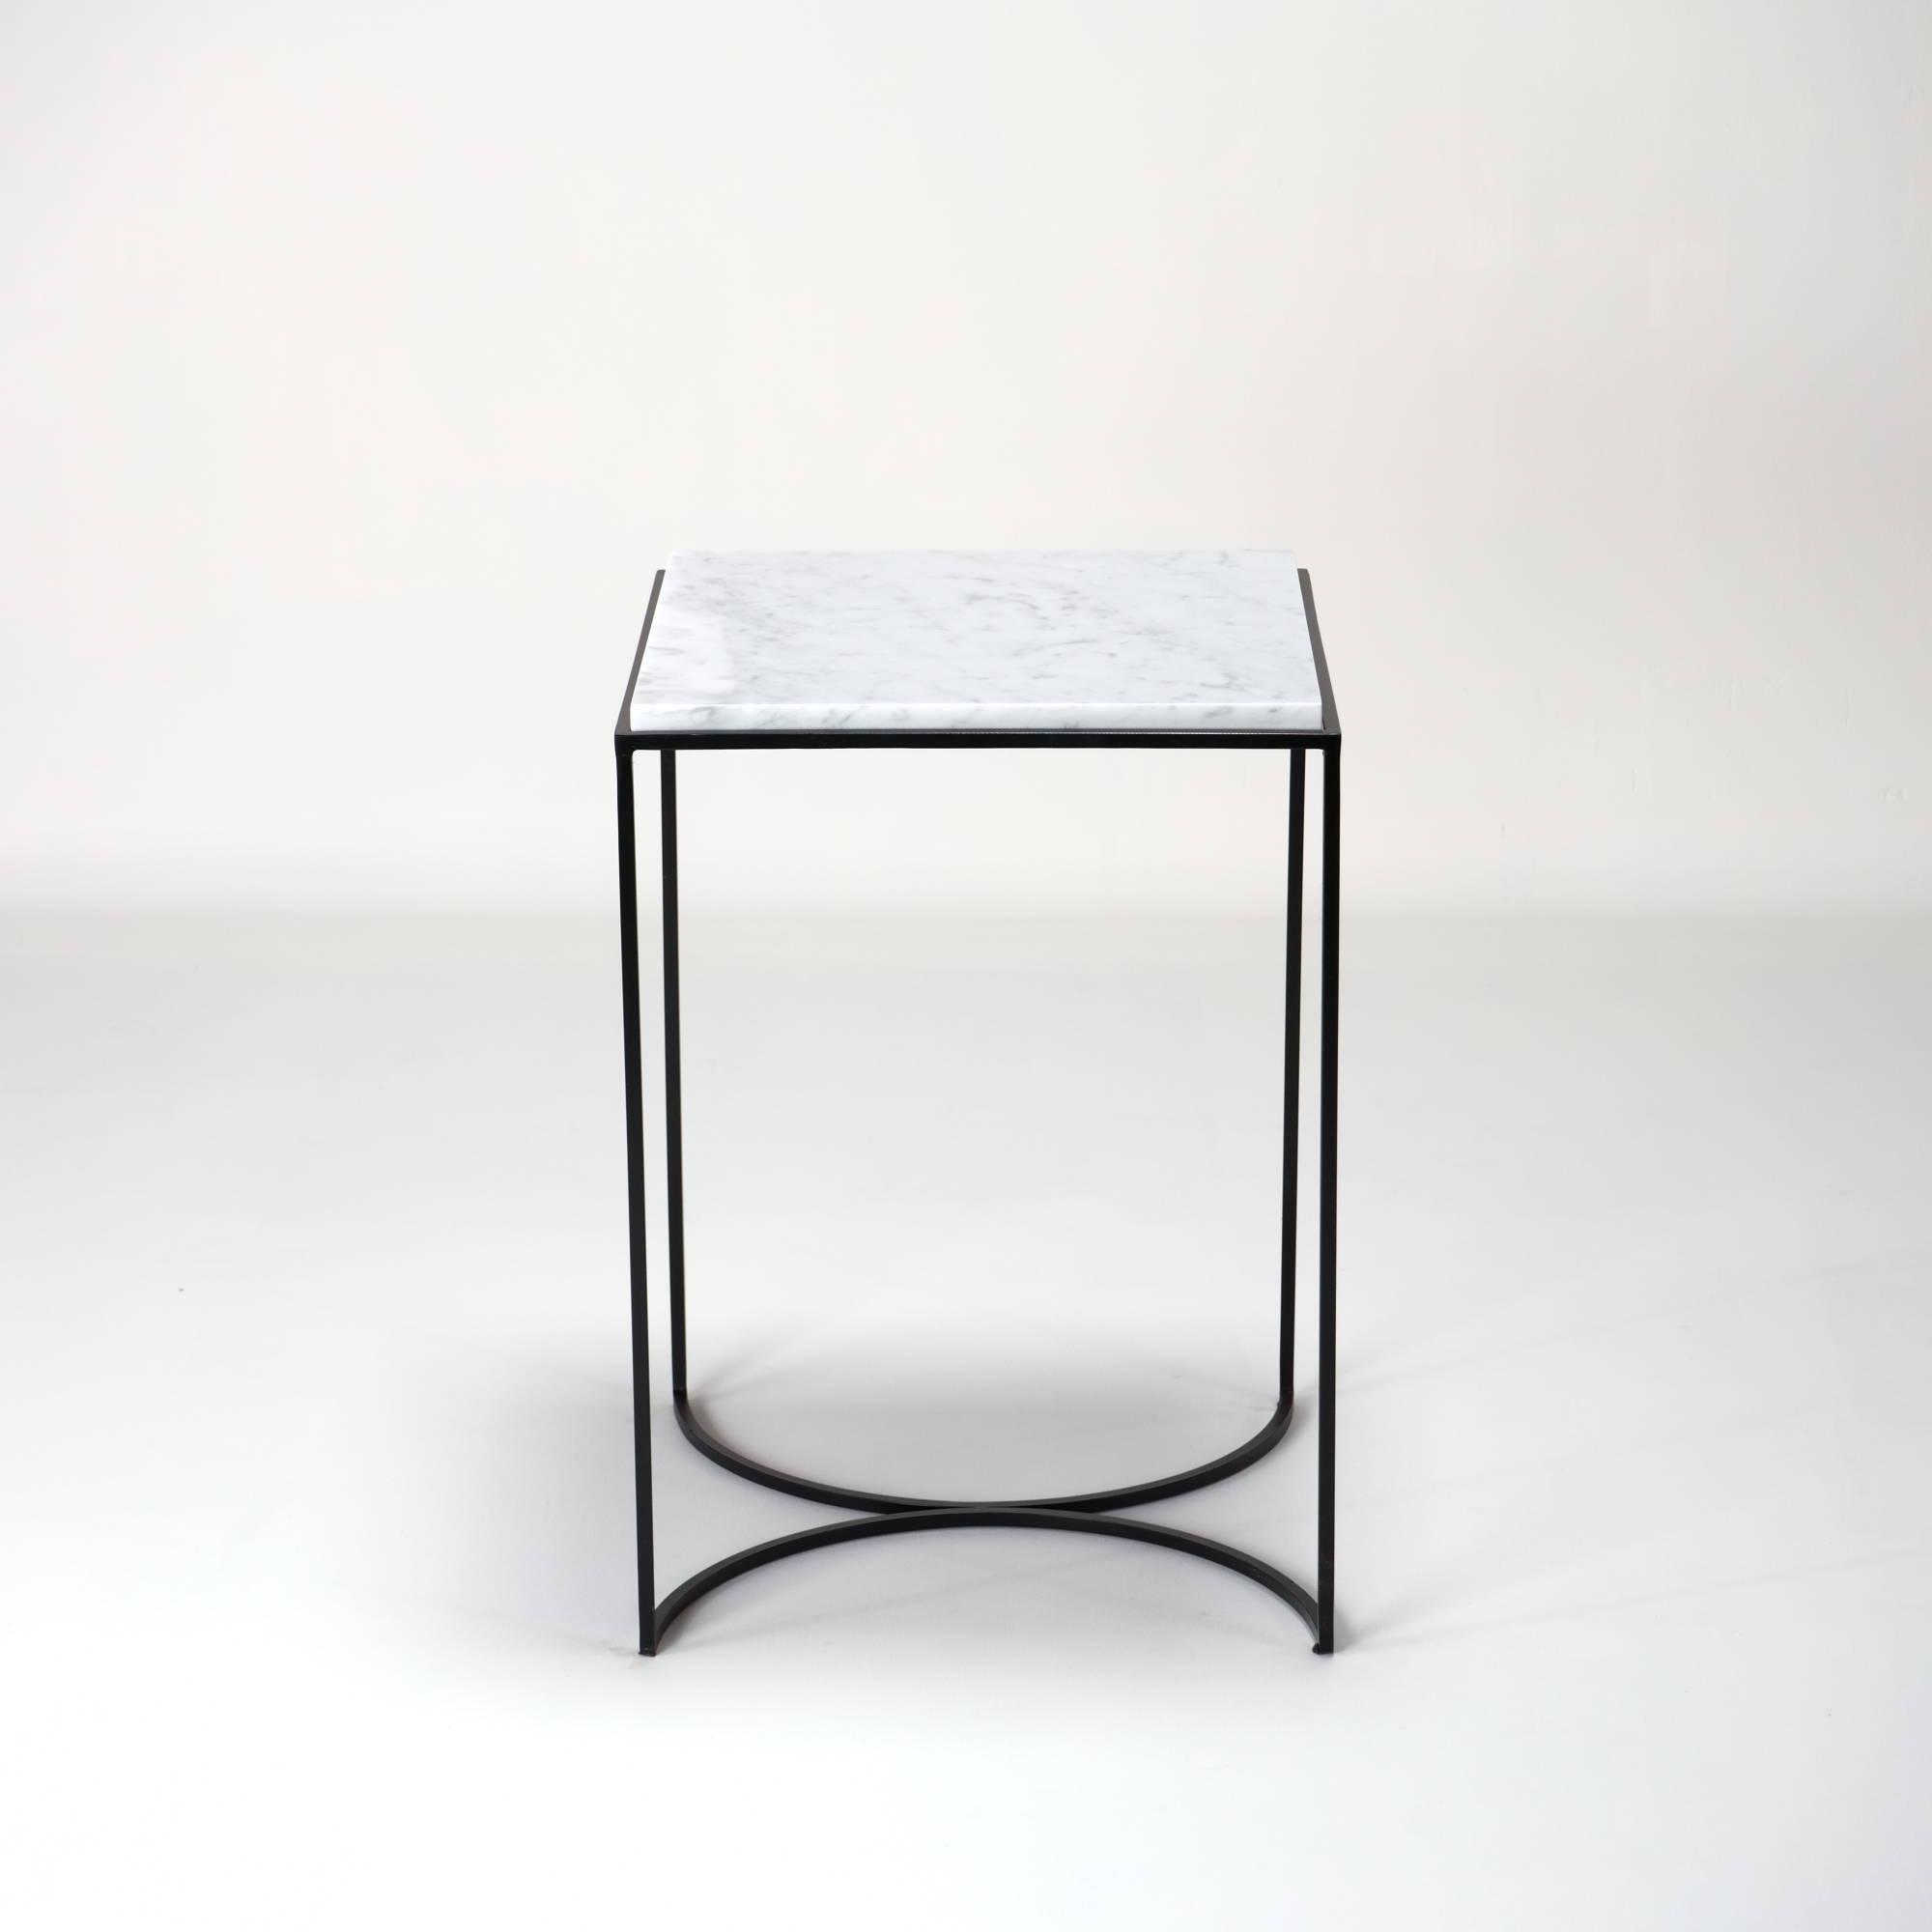 NaiveE’s side table embodies the spirit of a stylized cartoon. Based on the viewer’s perspective NaiveE’s legs animate into different poses, yet it stands still.

NaiveE is a playful object on which you can easily create a platonic connection